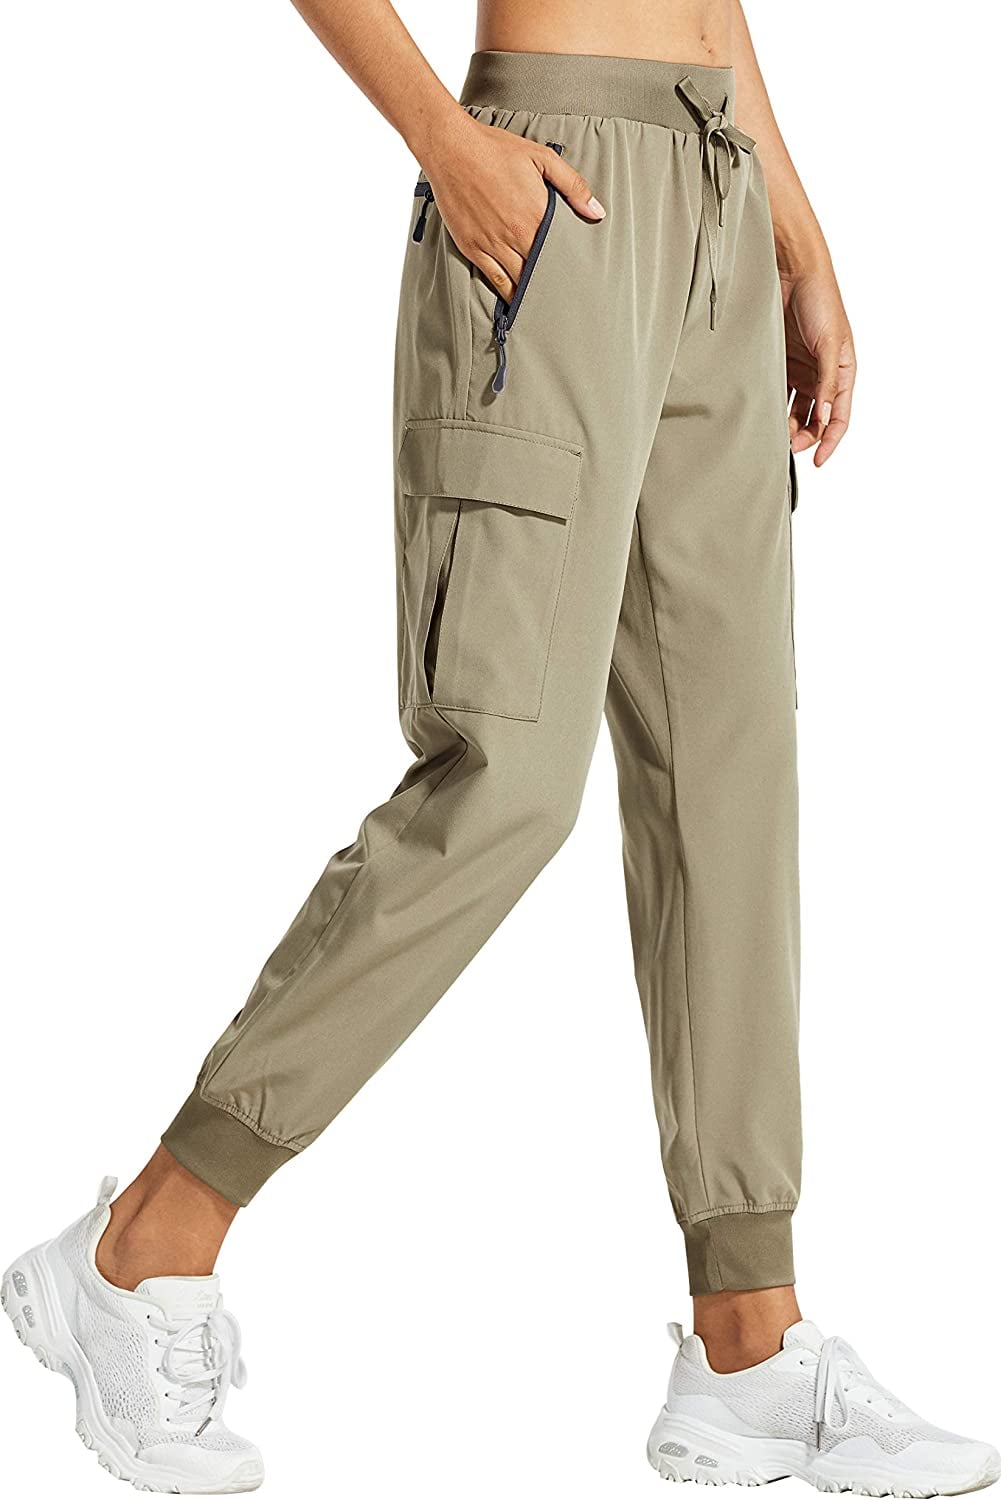 The Most Comfortable and Flattering Pants For Women